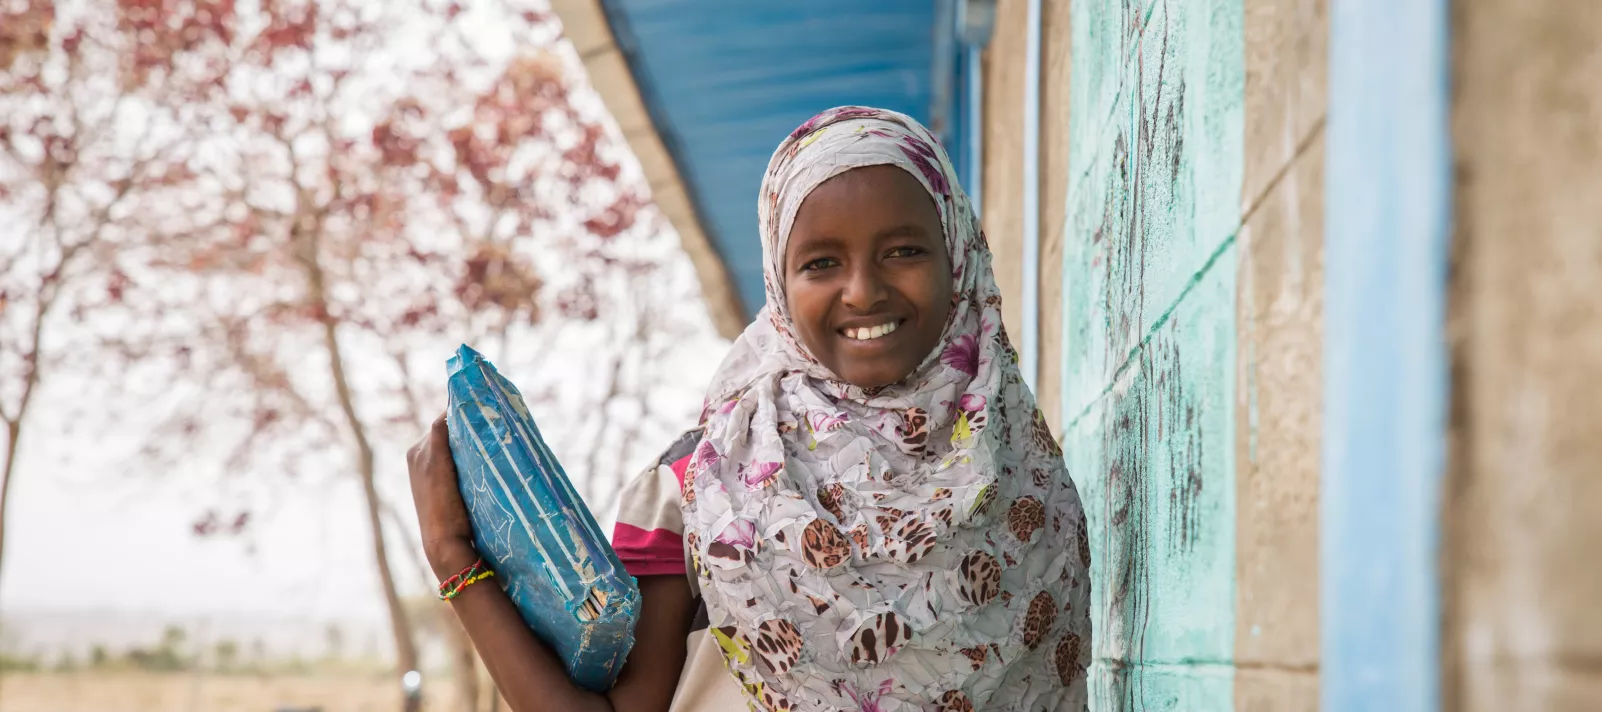 Rawda, 10, is a second-grader in Asore Primary School in drought-affected Asore Kebele (sub-district) in SNNPR Region of Ethiopia. 